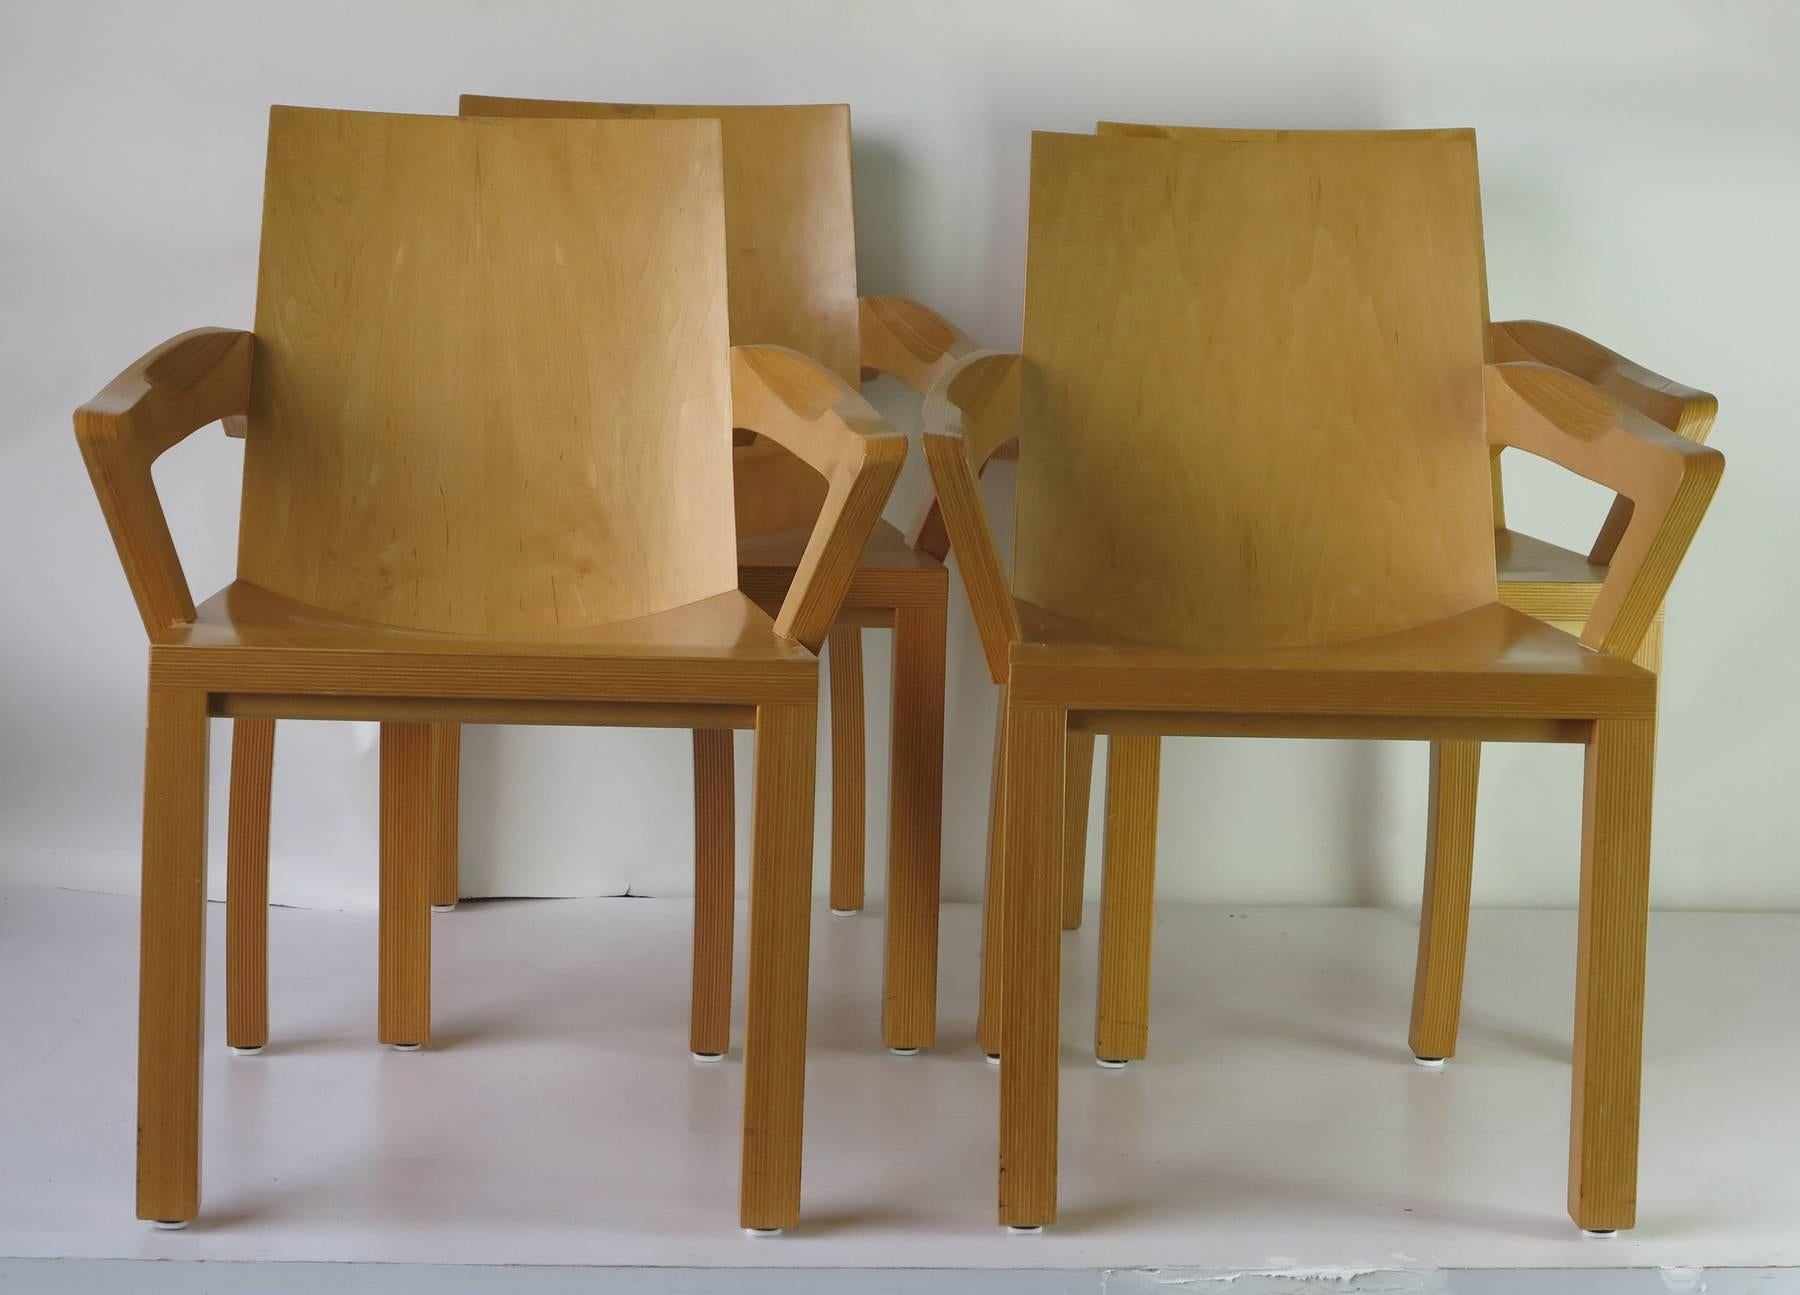 Four Dakota Jackson Arm Chairs. Dining room type chairs very comfortable seats. Beautifully constructed with laminated maple.  